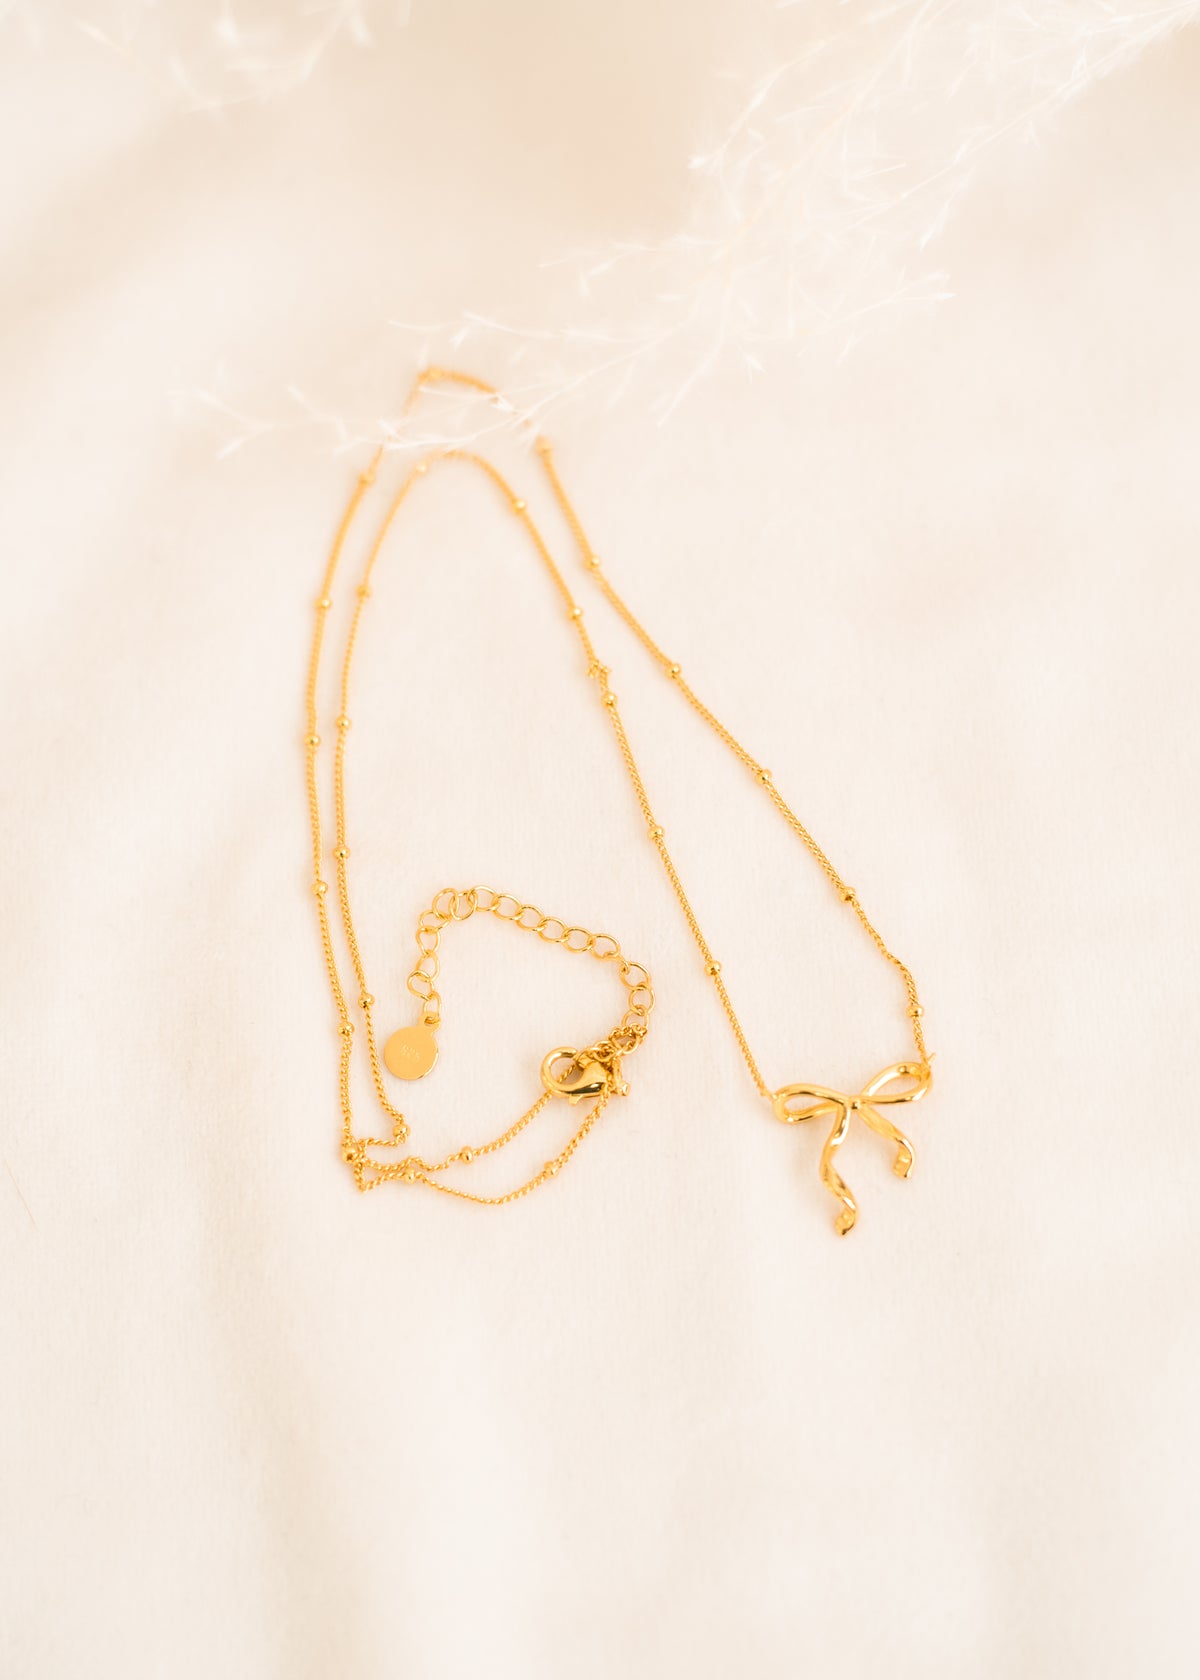 The Freya Necklace